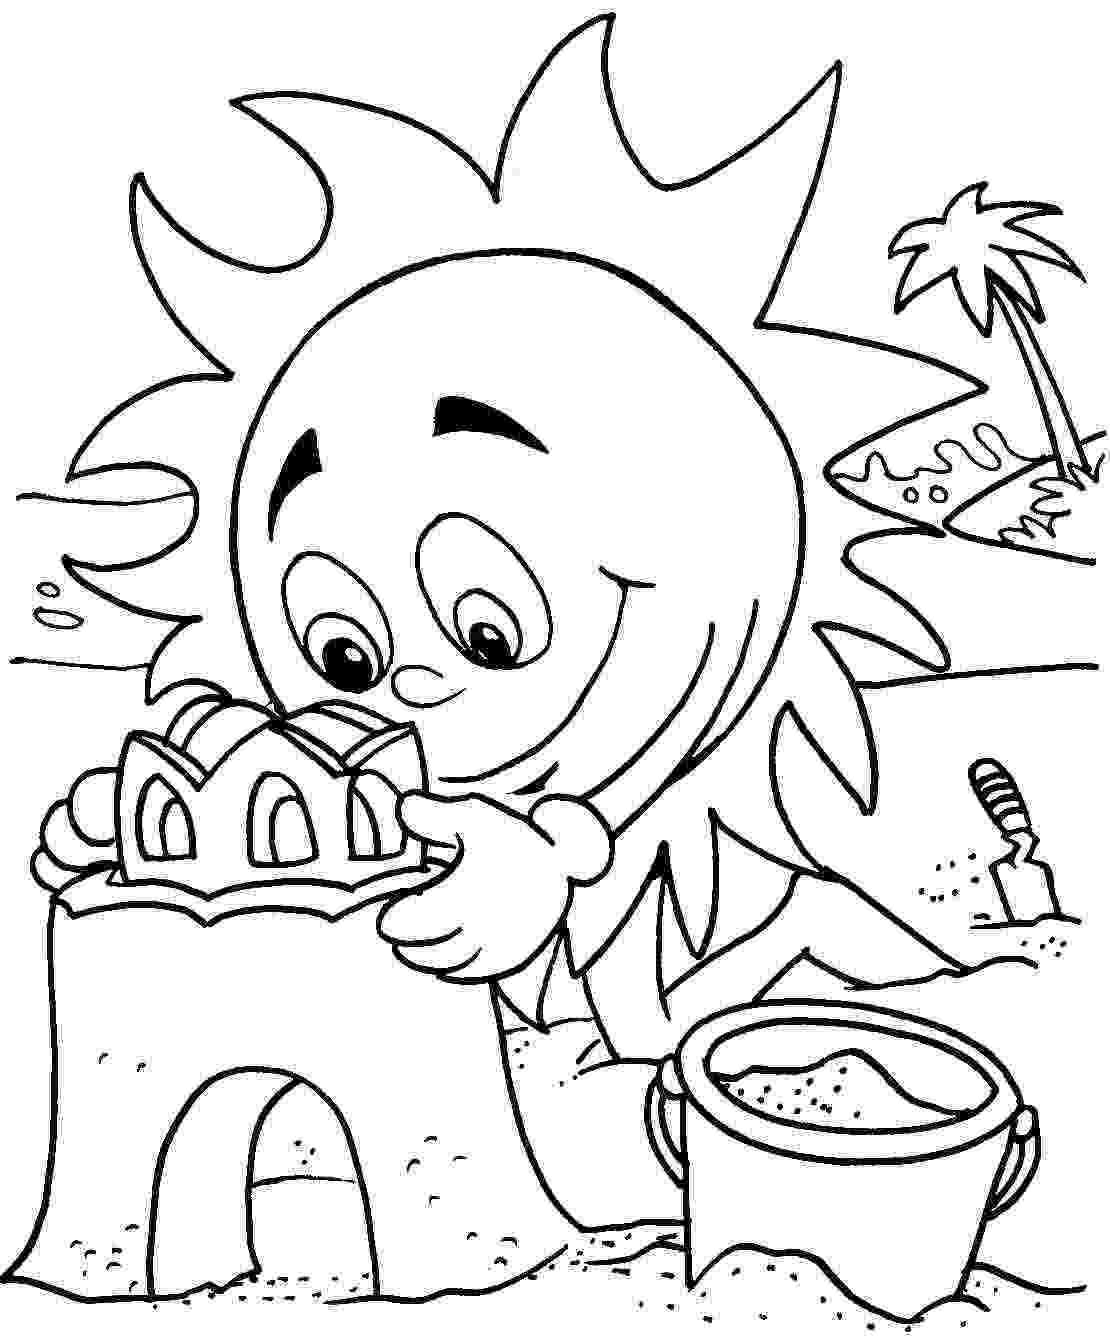 summer coloring pictures summer fun coloring pages to download and print for free coloring pictures summer 